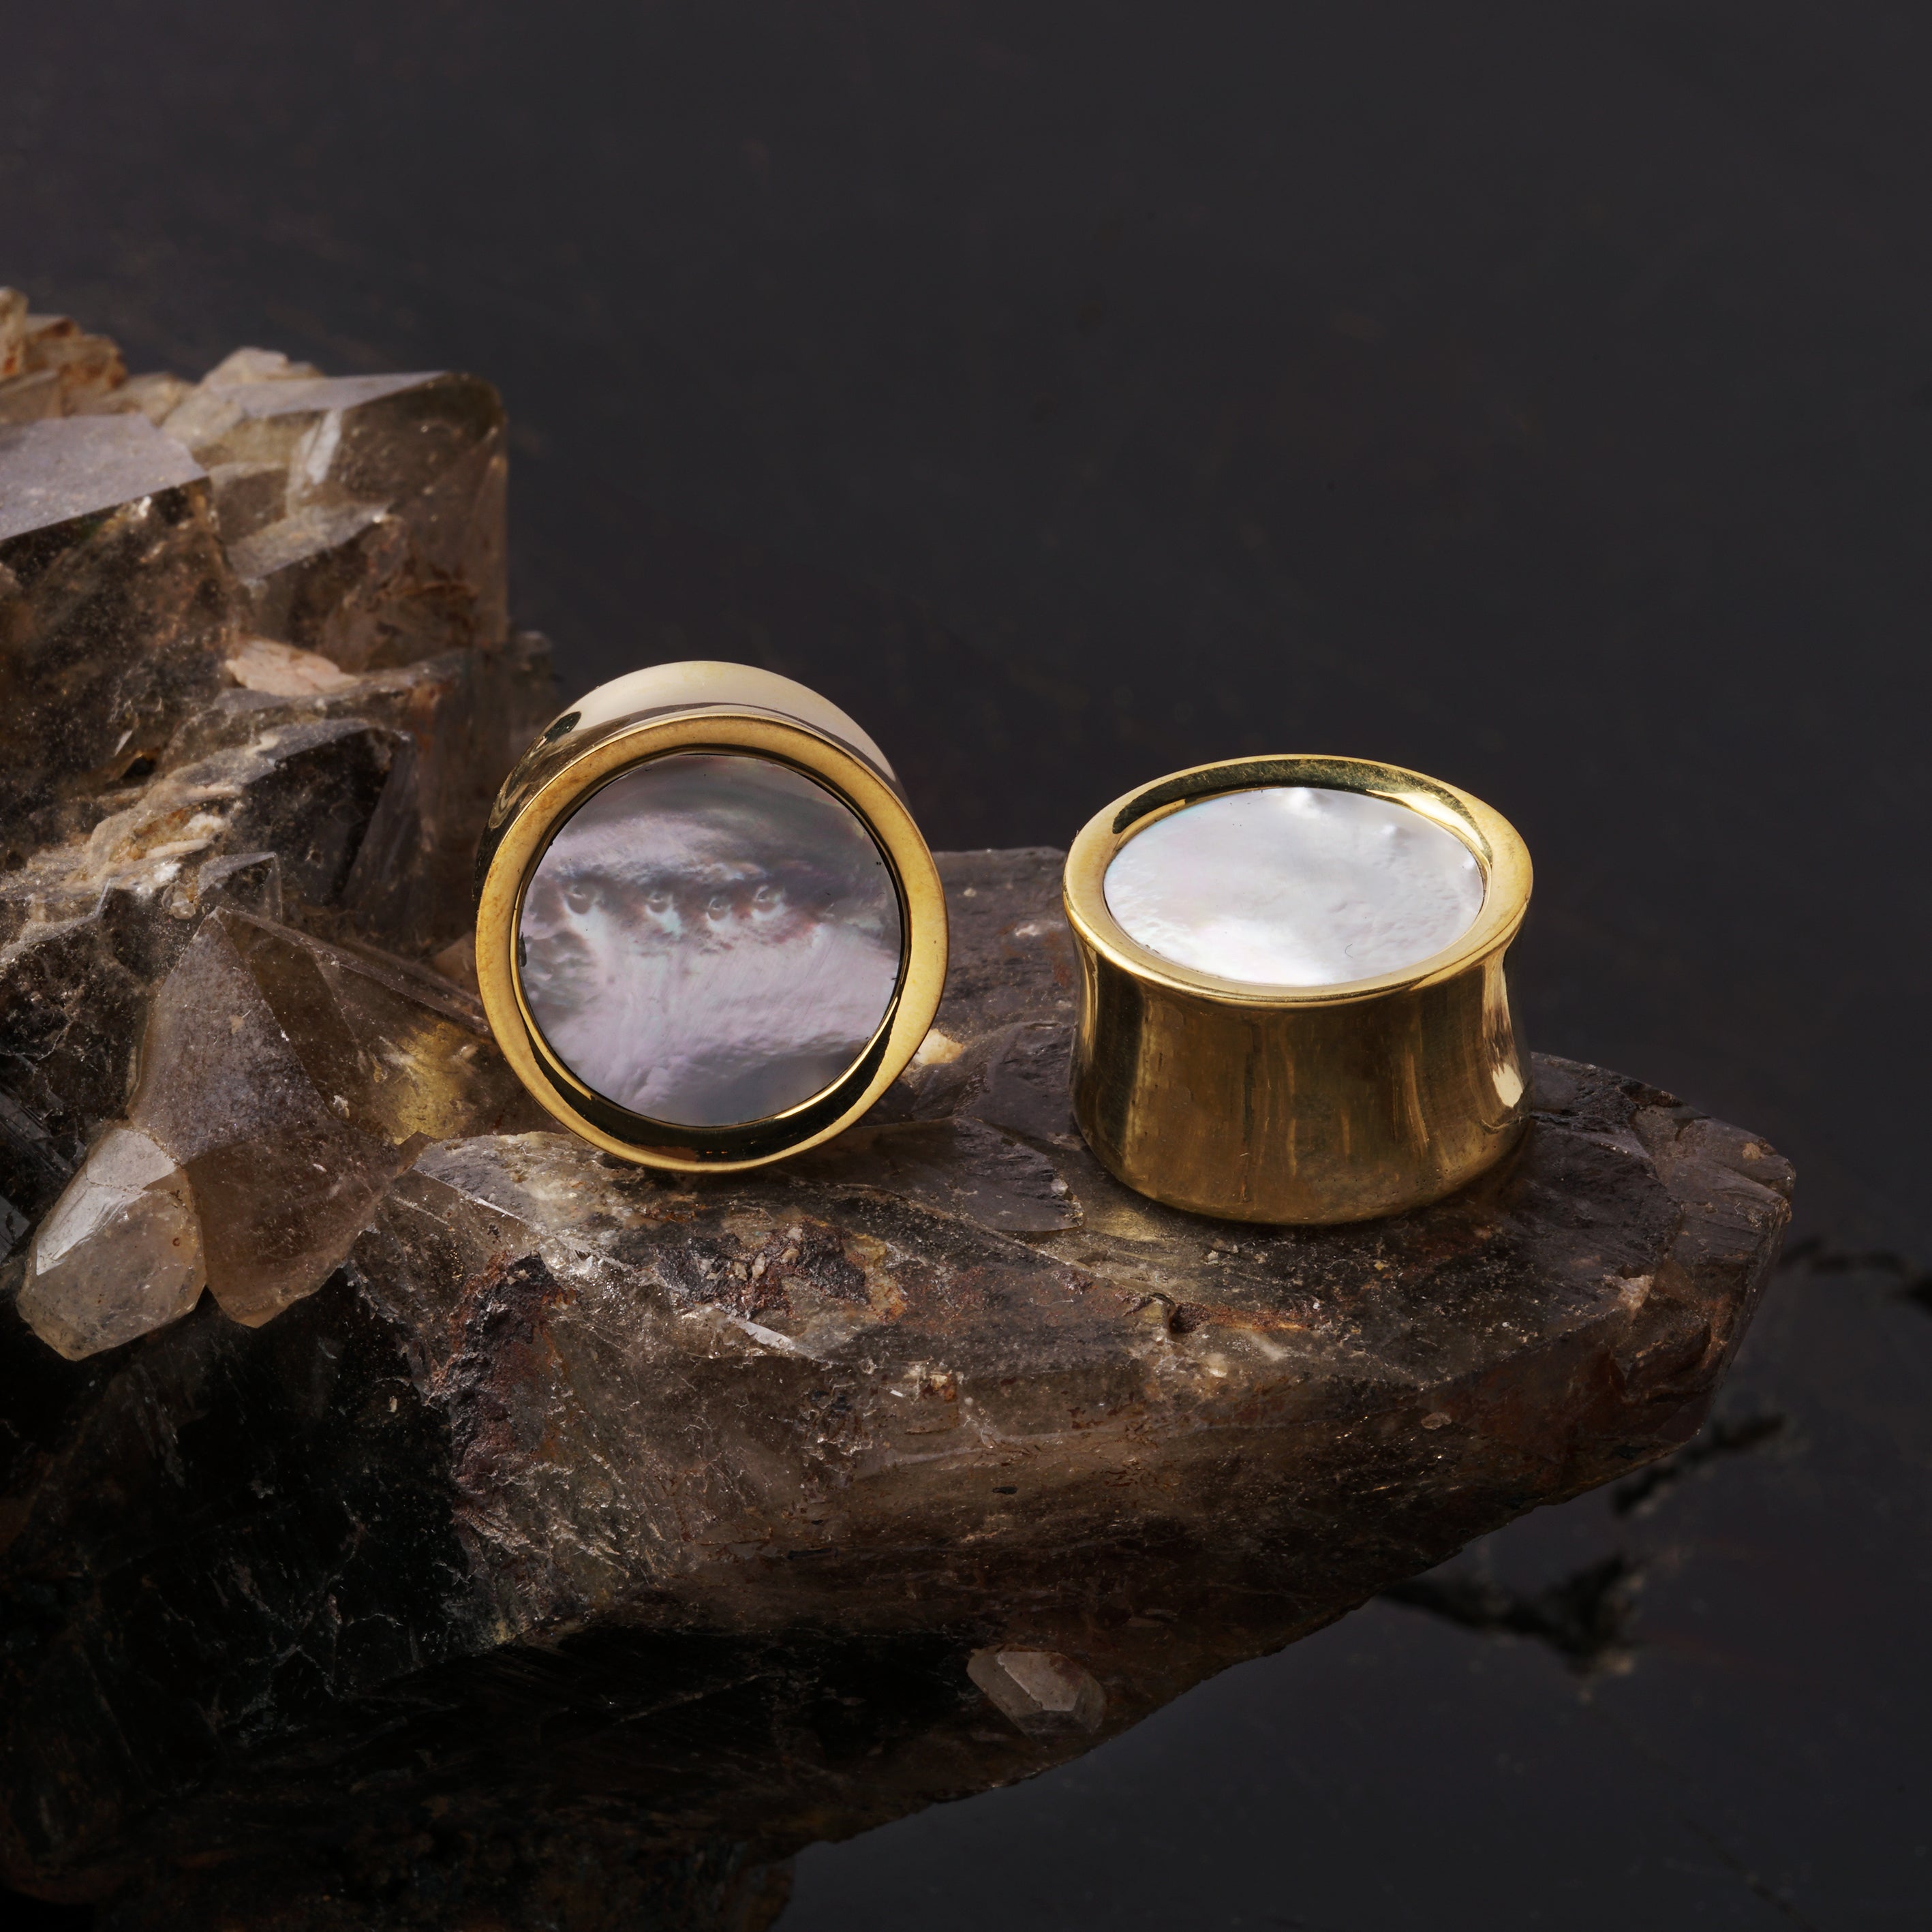 pair of Golden plug earring with Mother of Pearl for stretched ears